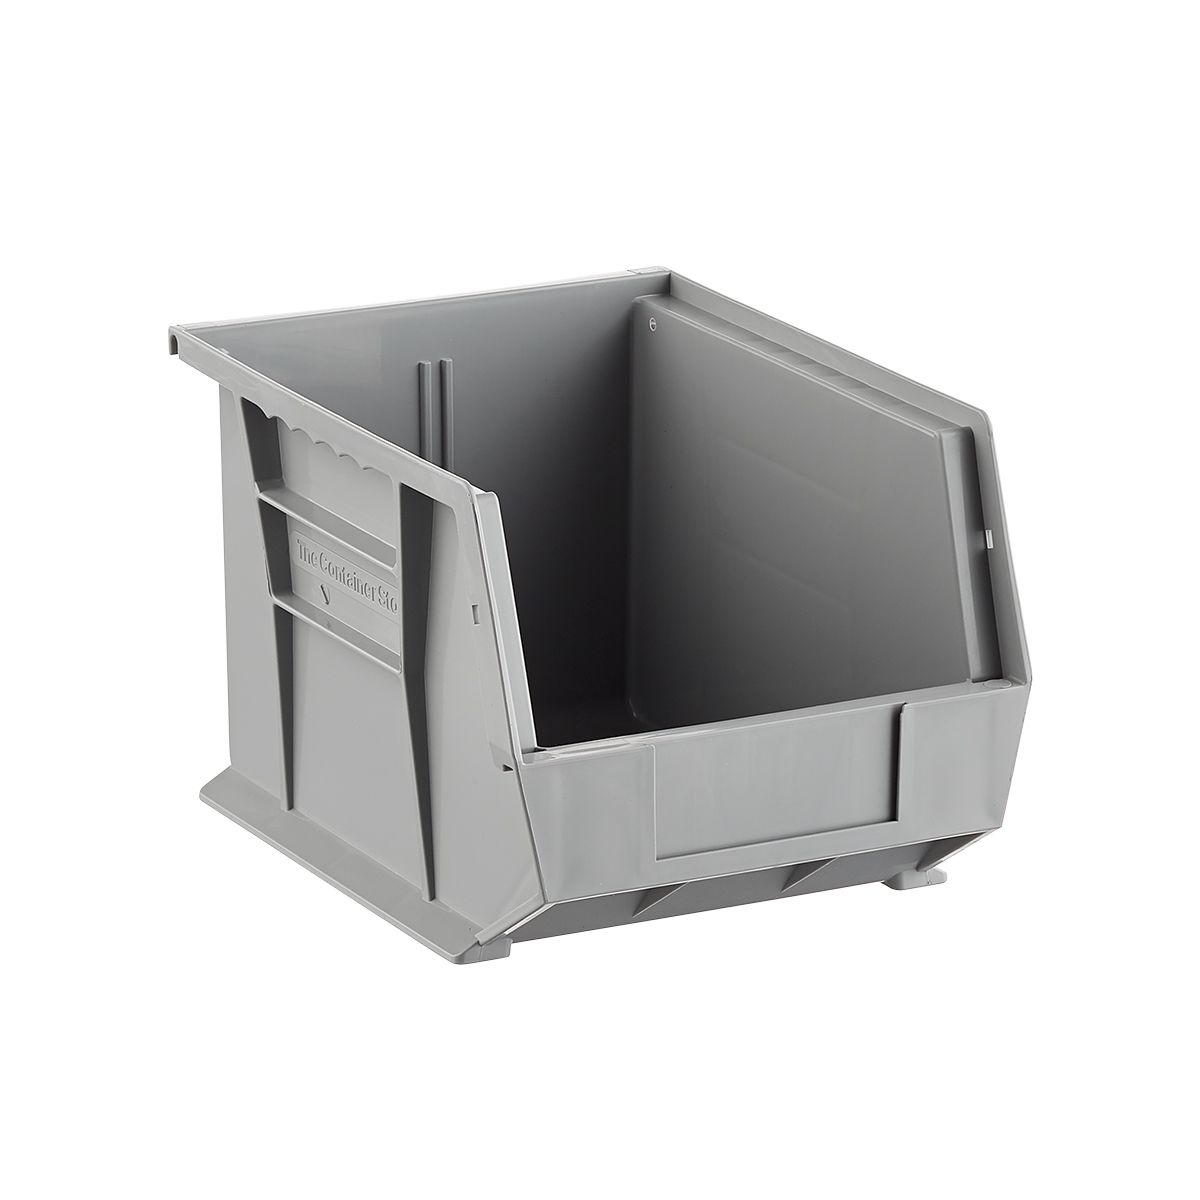 Grey Utility Medium Stackable Plastic Bins | The Container Store